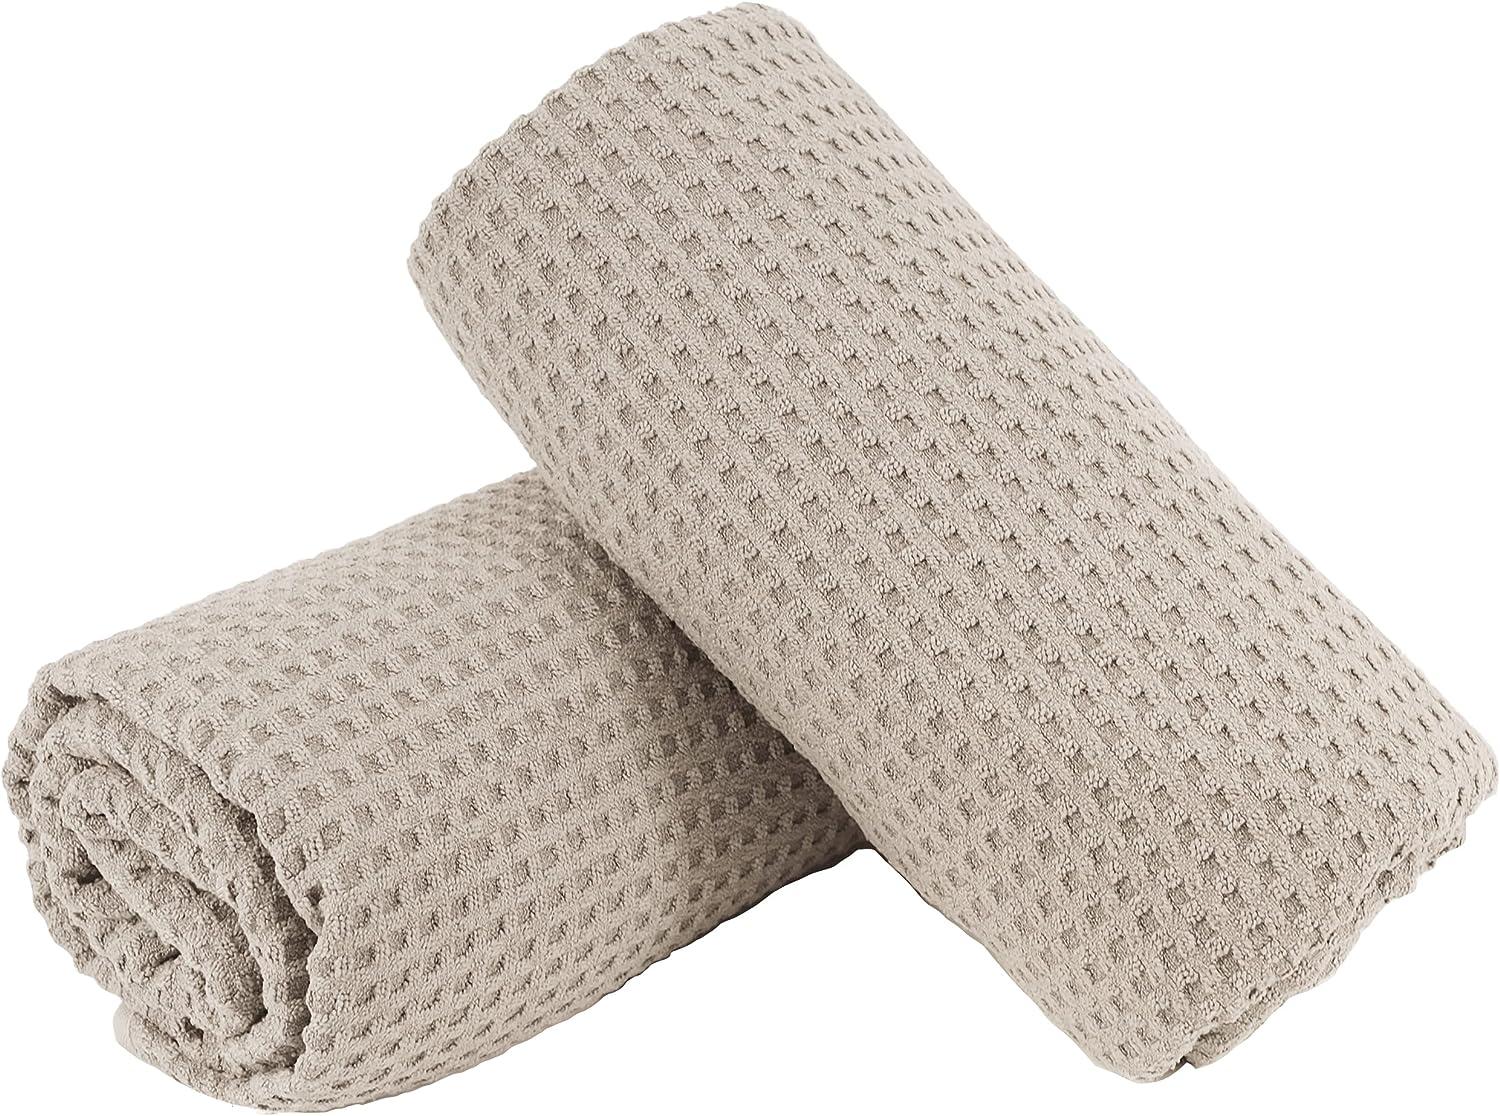 POLYTE Microfiber Oversize Quick Dry Lint Free Bath Towel, 60 x 30 in, 4 Pack (Beige, Waffle Weave)